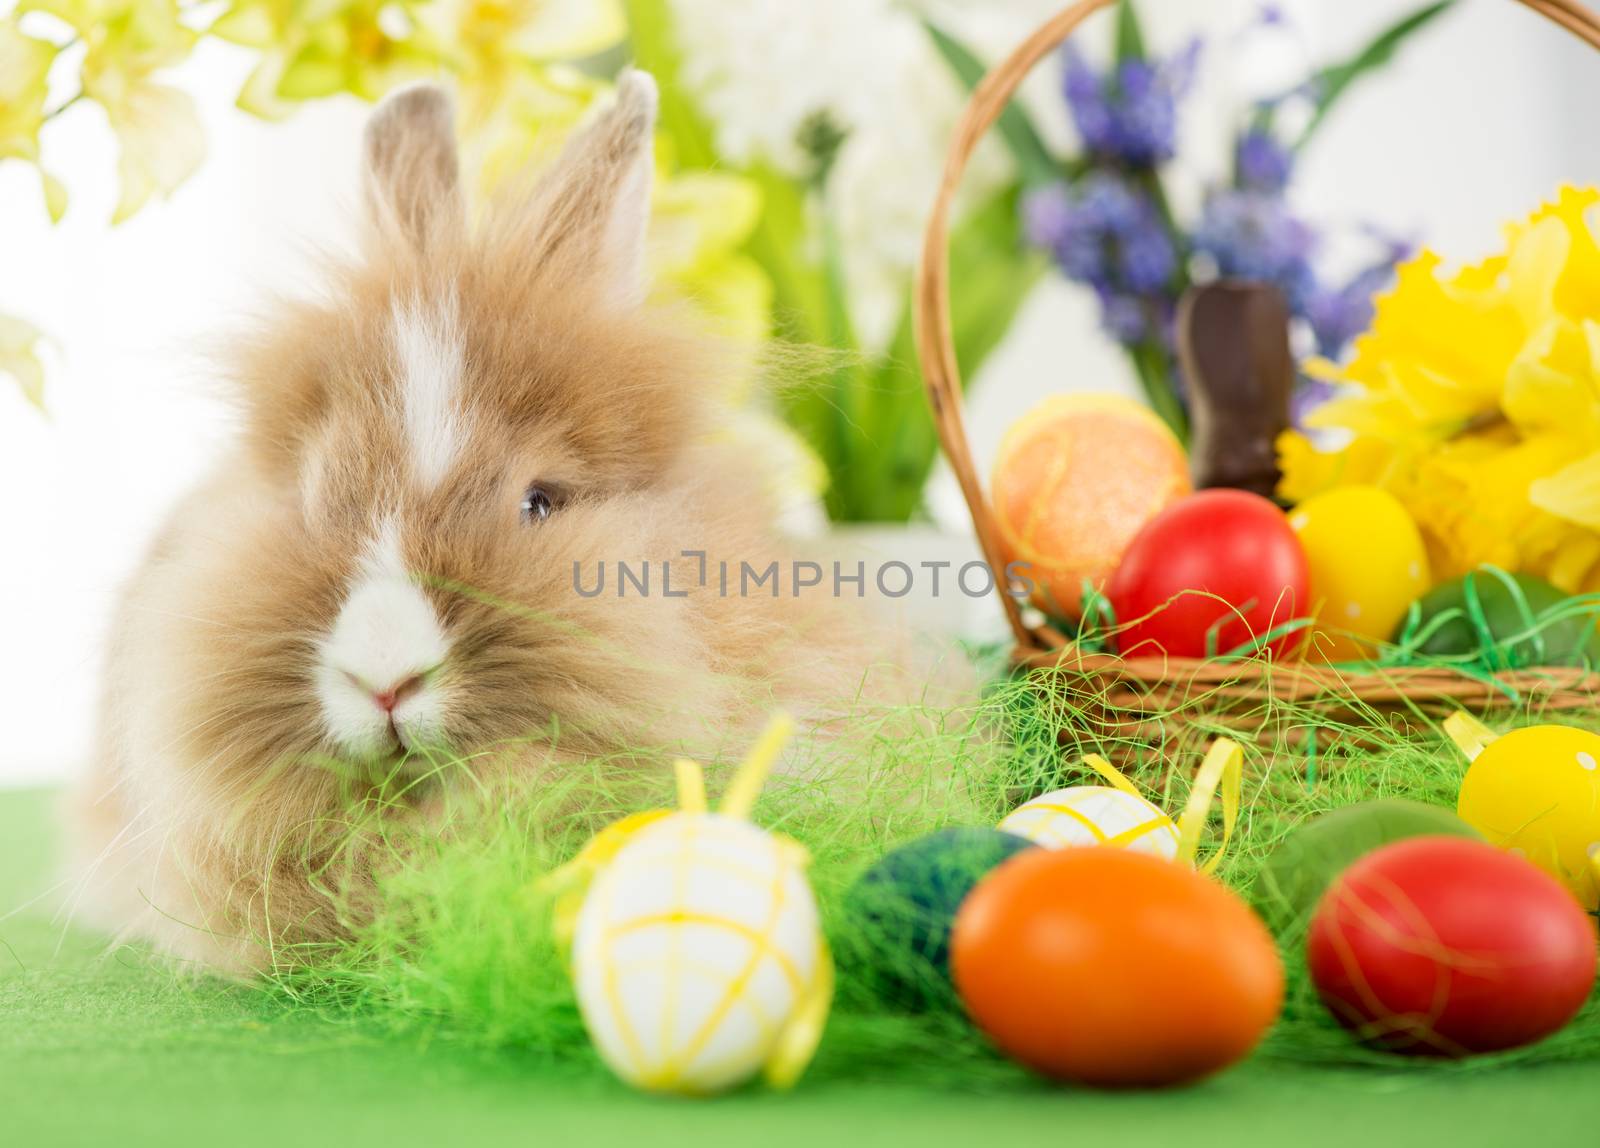 Easter Bunny with eggs in basket and flower. Selective focus. Focus on rabbit.